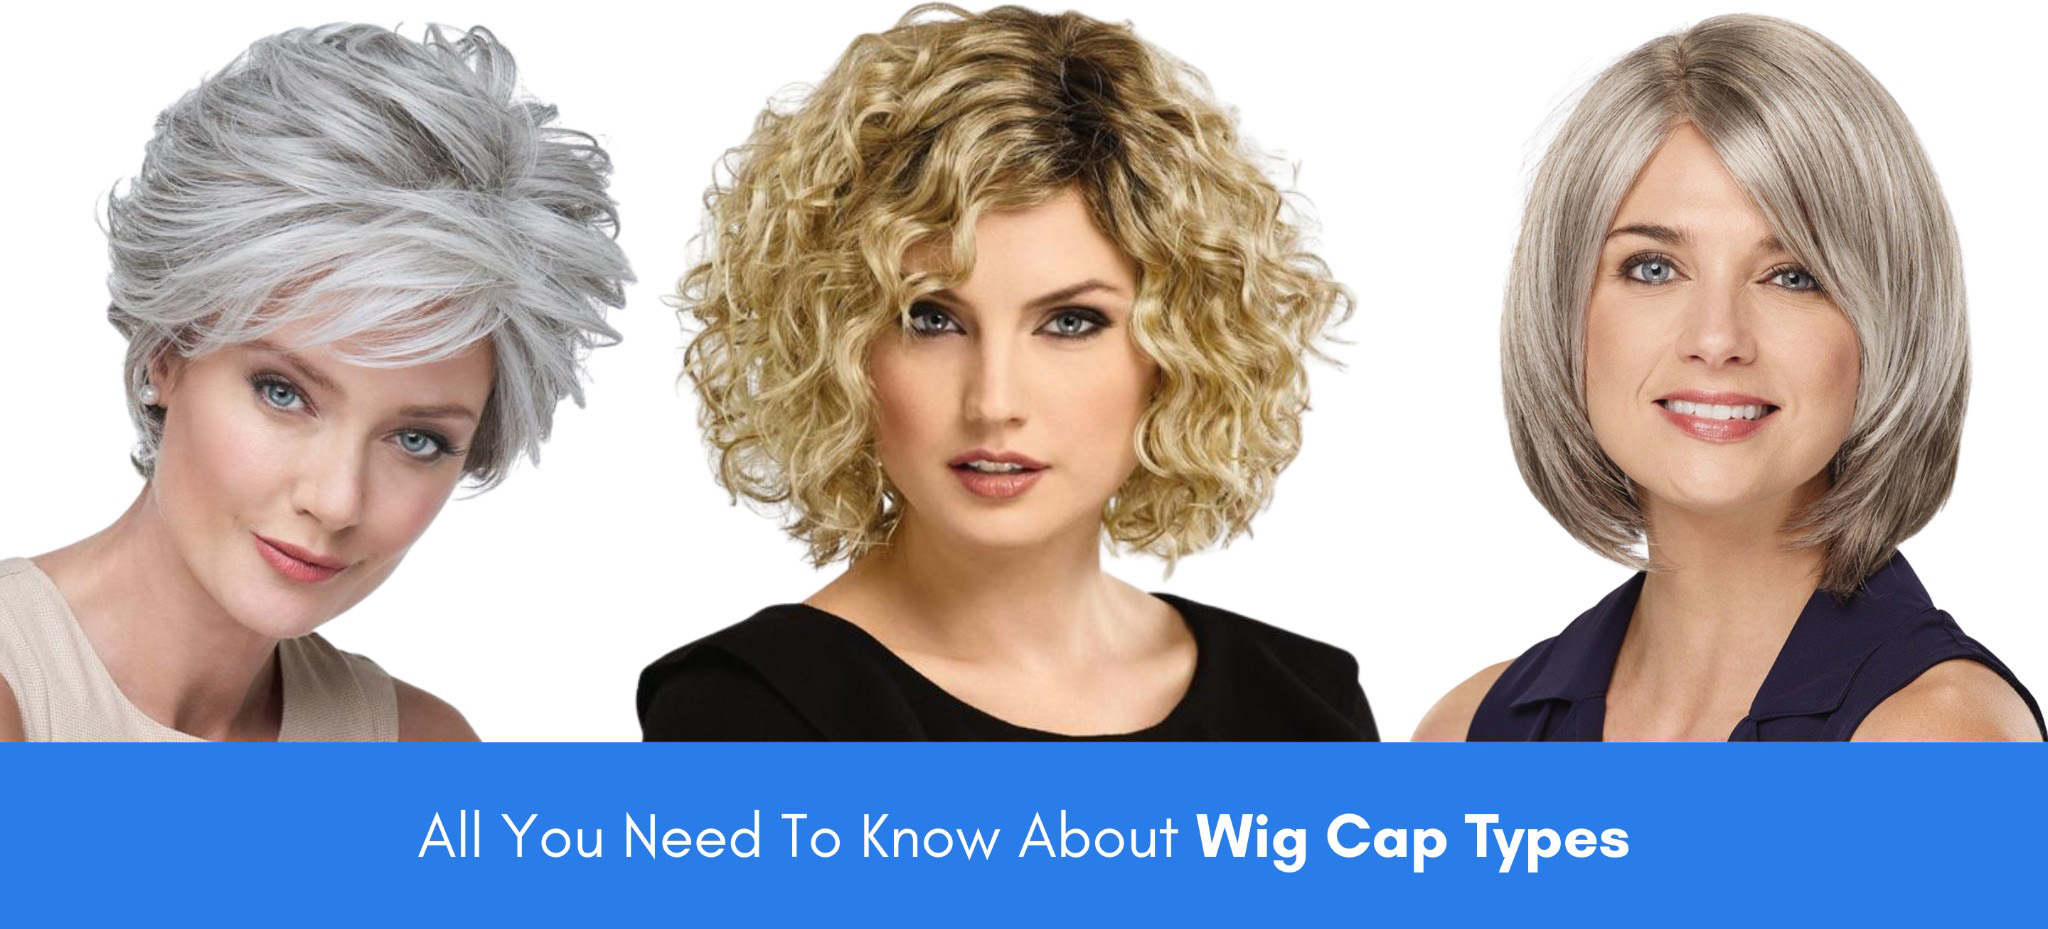 all you need to know about wig cap types